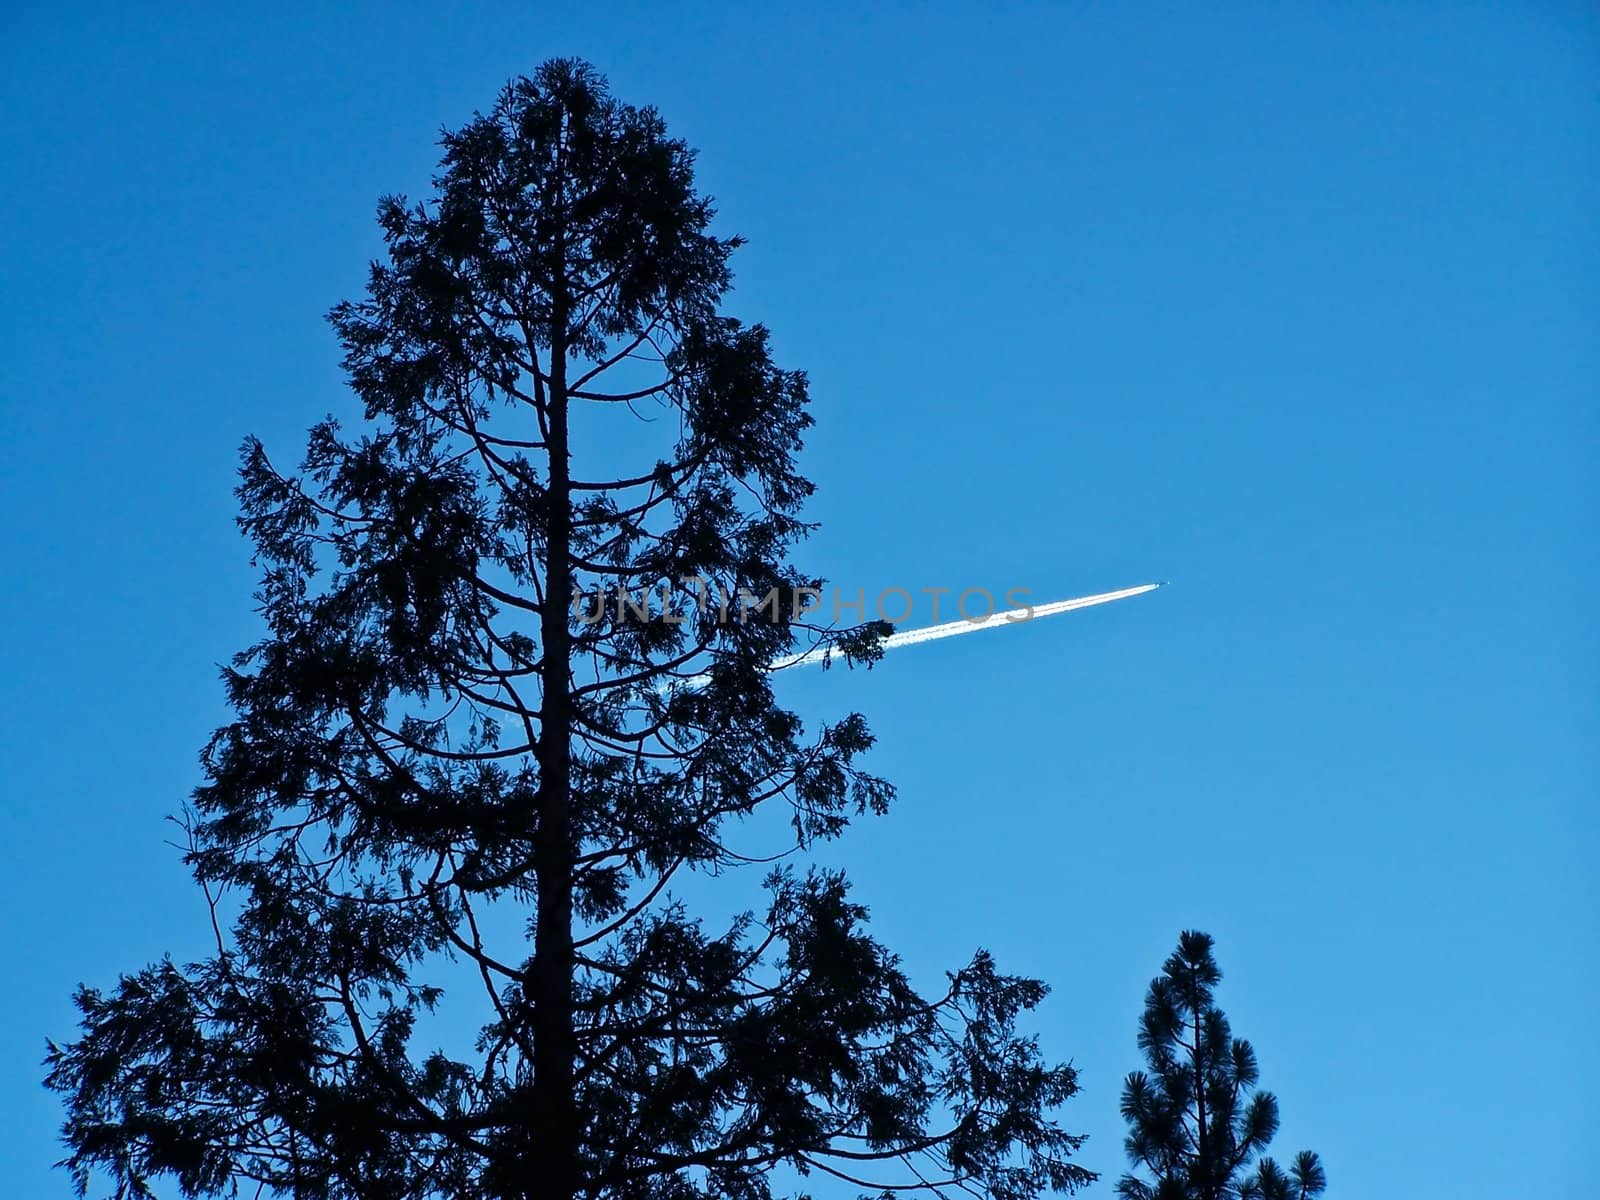 Tall tree against blue sky with contrails of plane